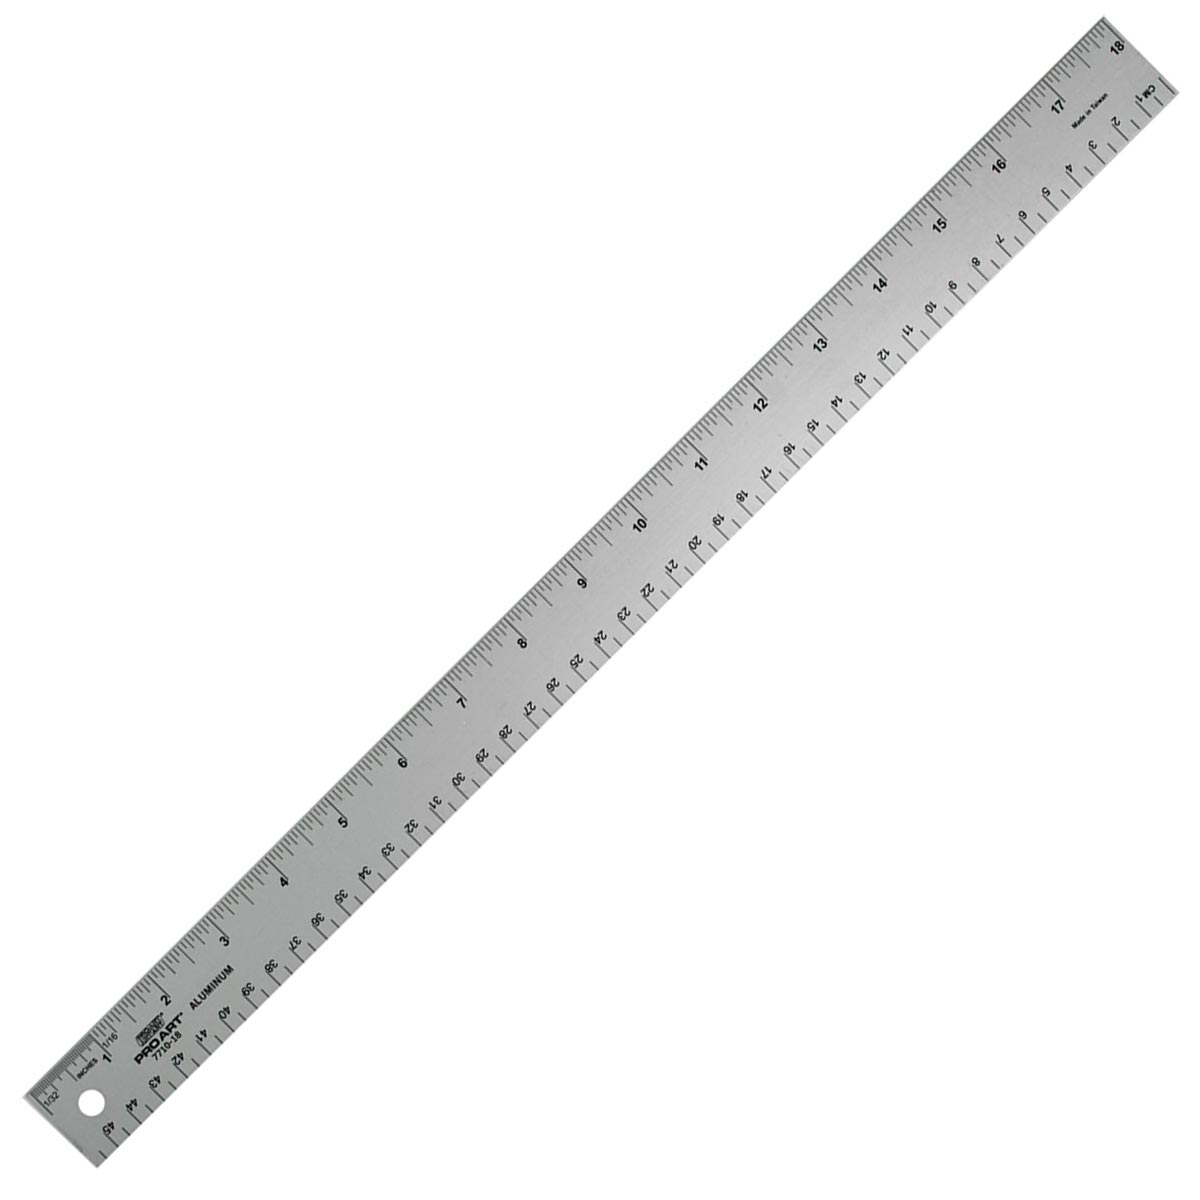 Aluminum Ruler by Pro Art - 18 x 1-1/4 inches